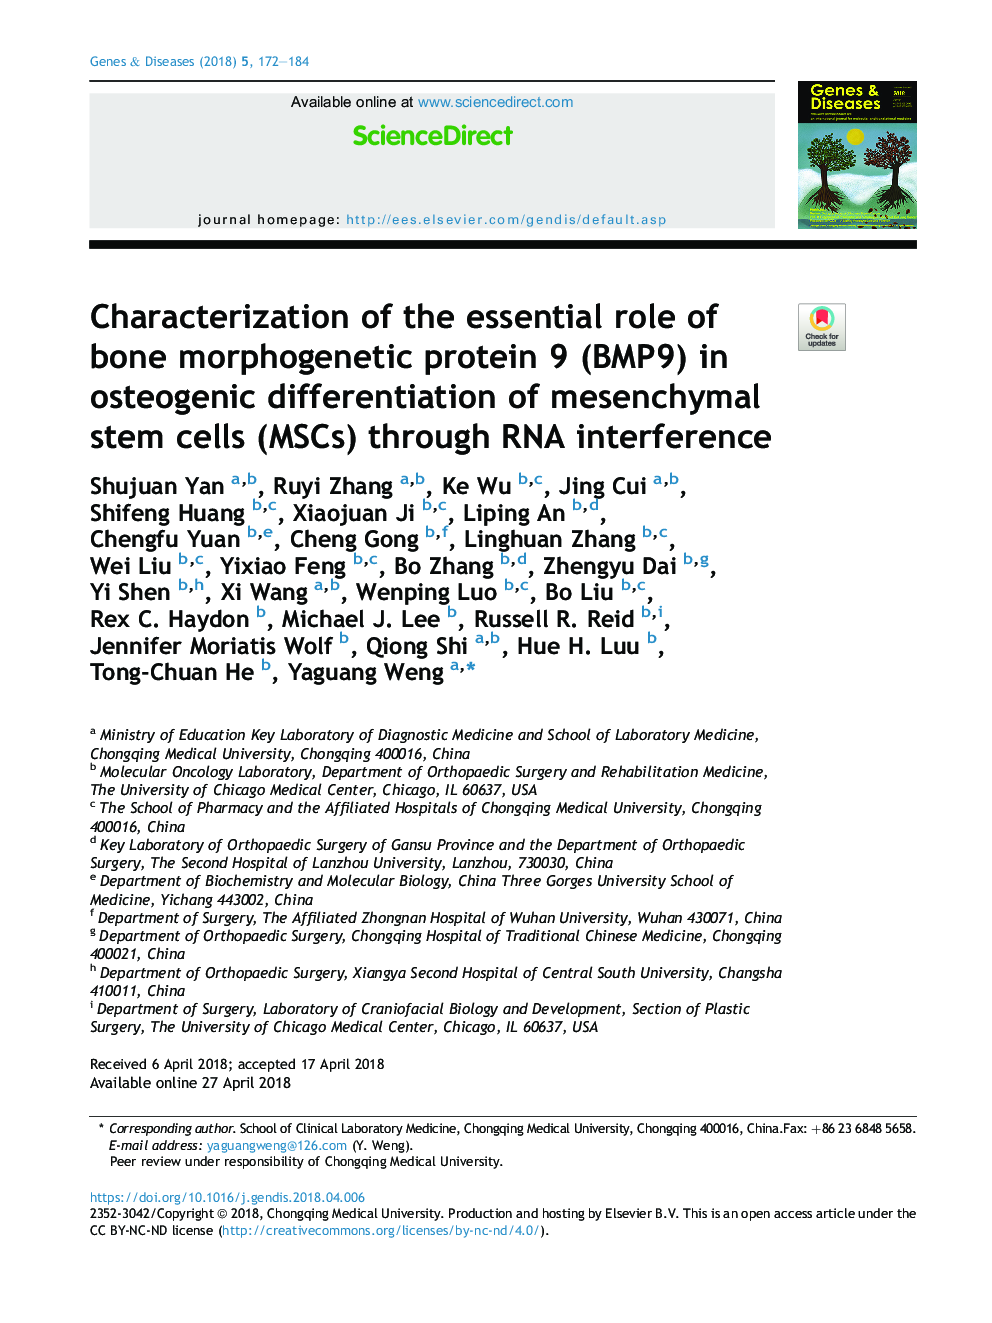 Characterization of the essential role of bone morphogenetic protein 9 (BMP9) in osteogenic differentiation of mesenchymal stem cells (MSCs) through RNA interference